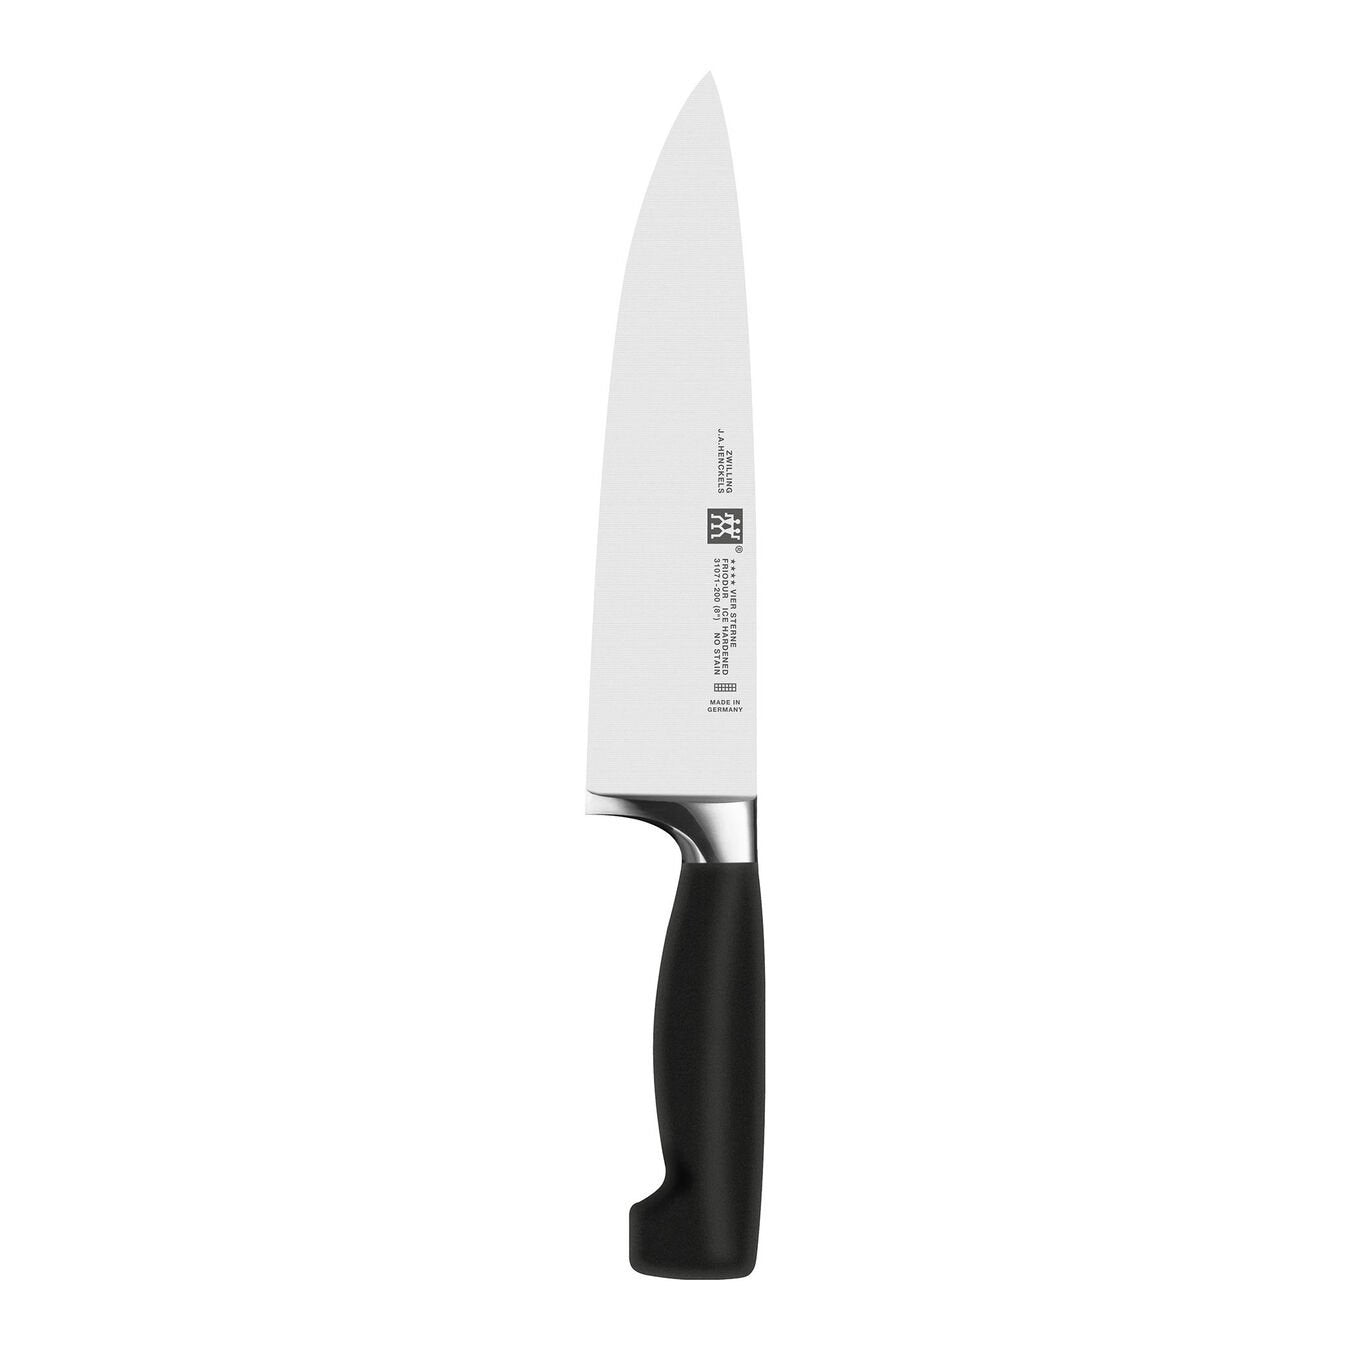 chef's knife with black handle on white background